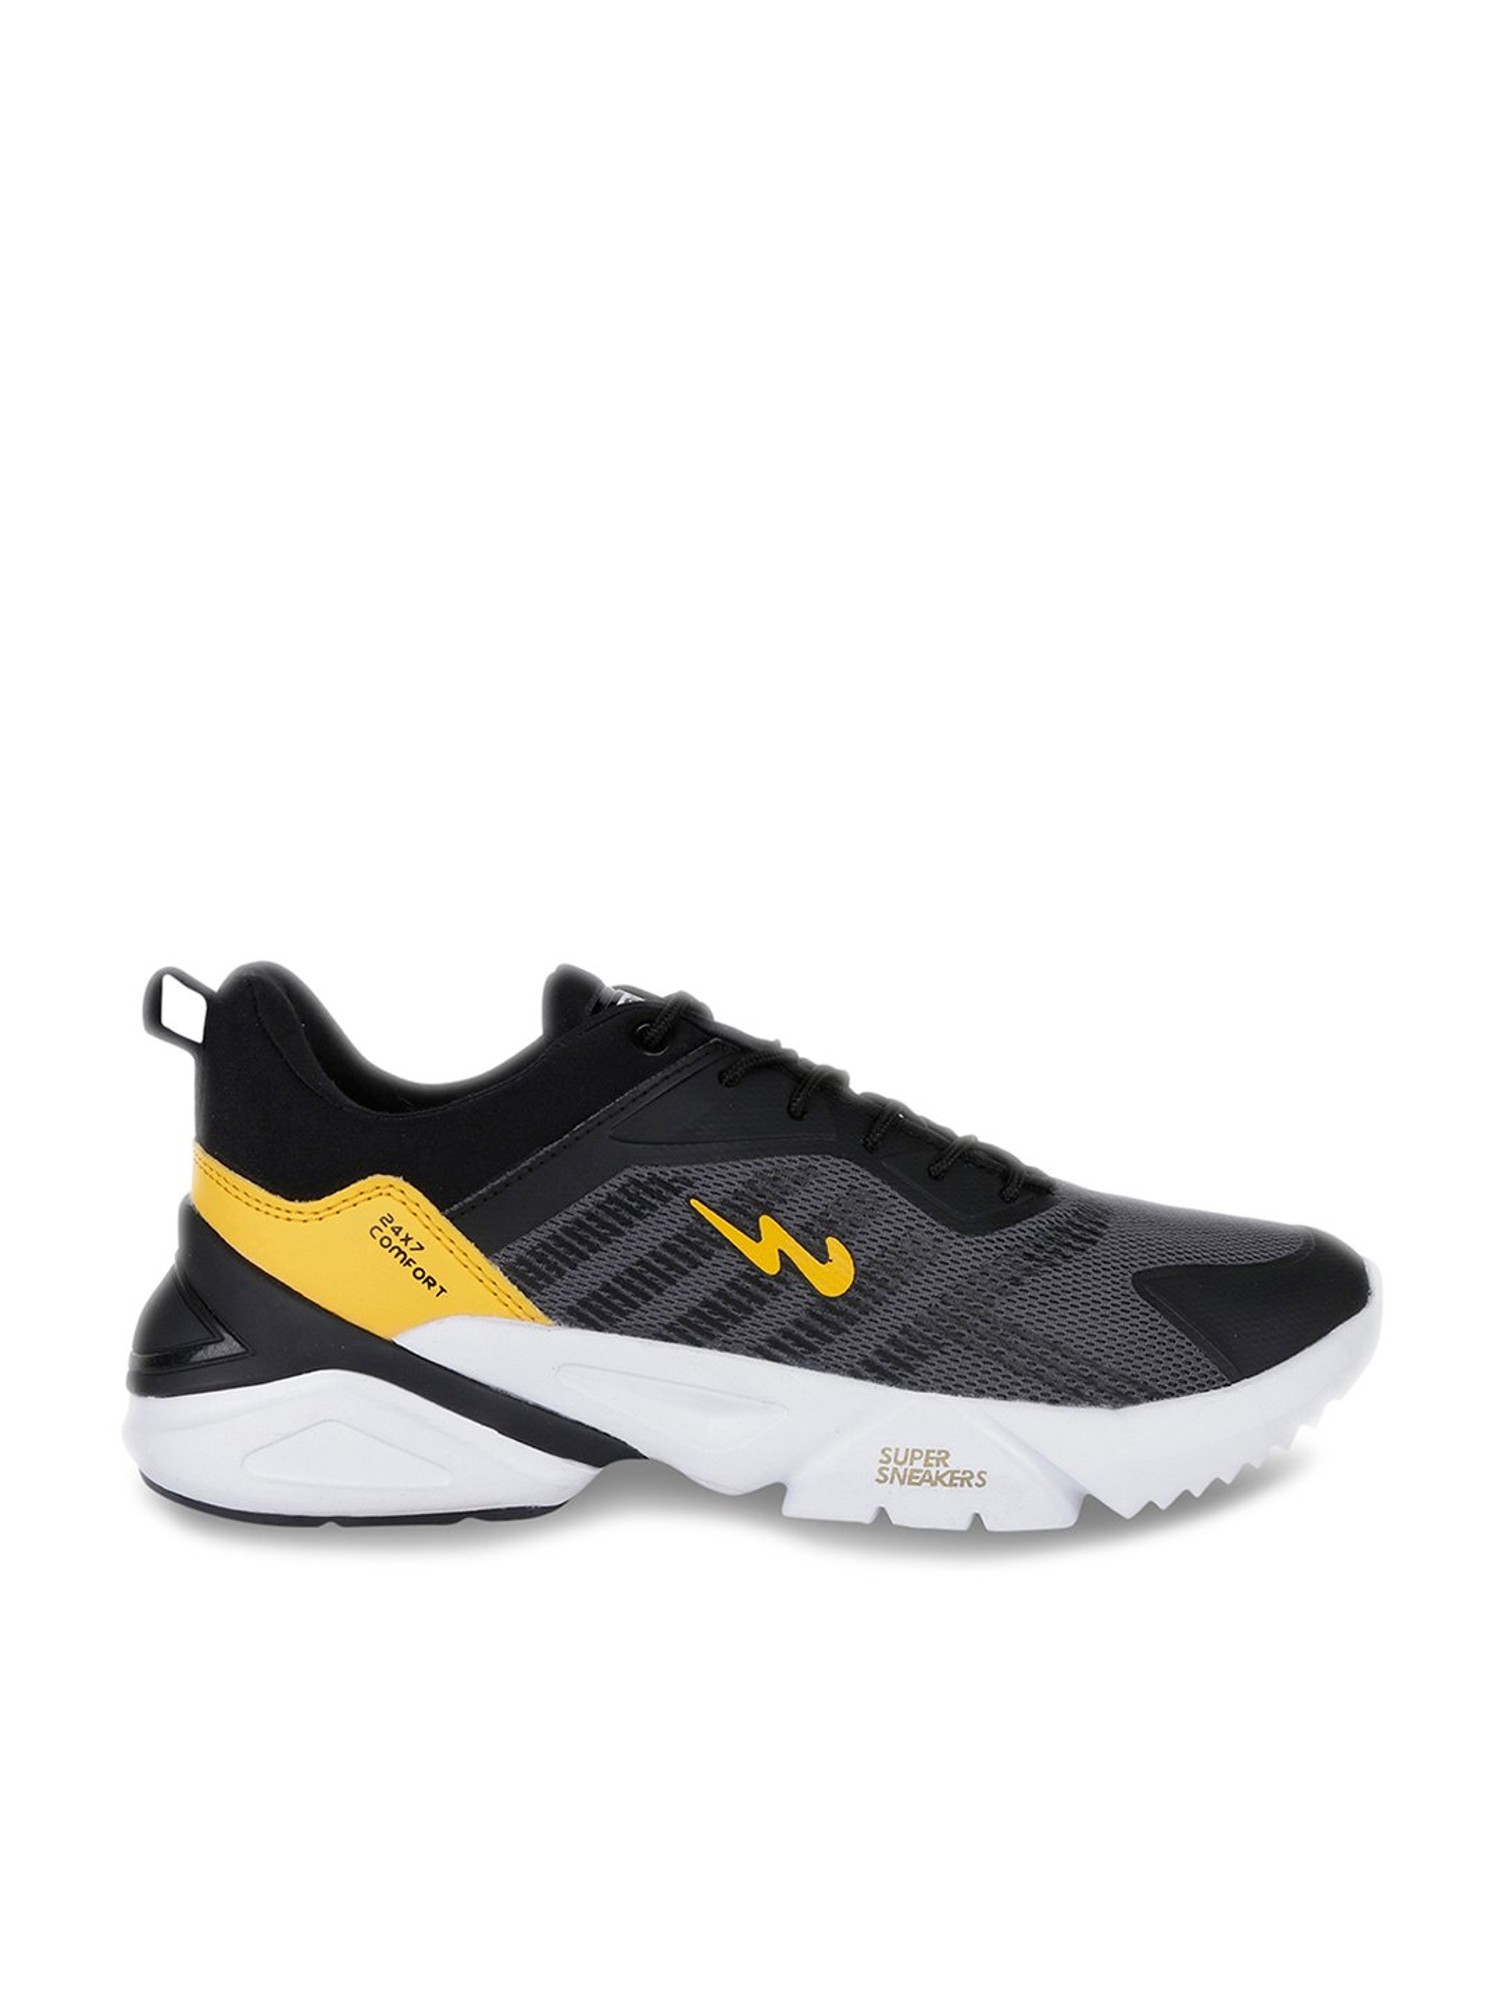 Buy Campus Hot-ride Running Shoes Online